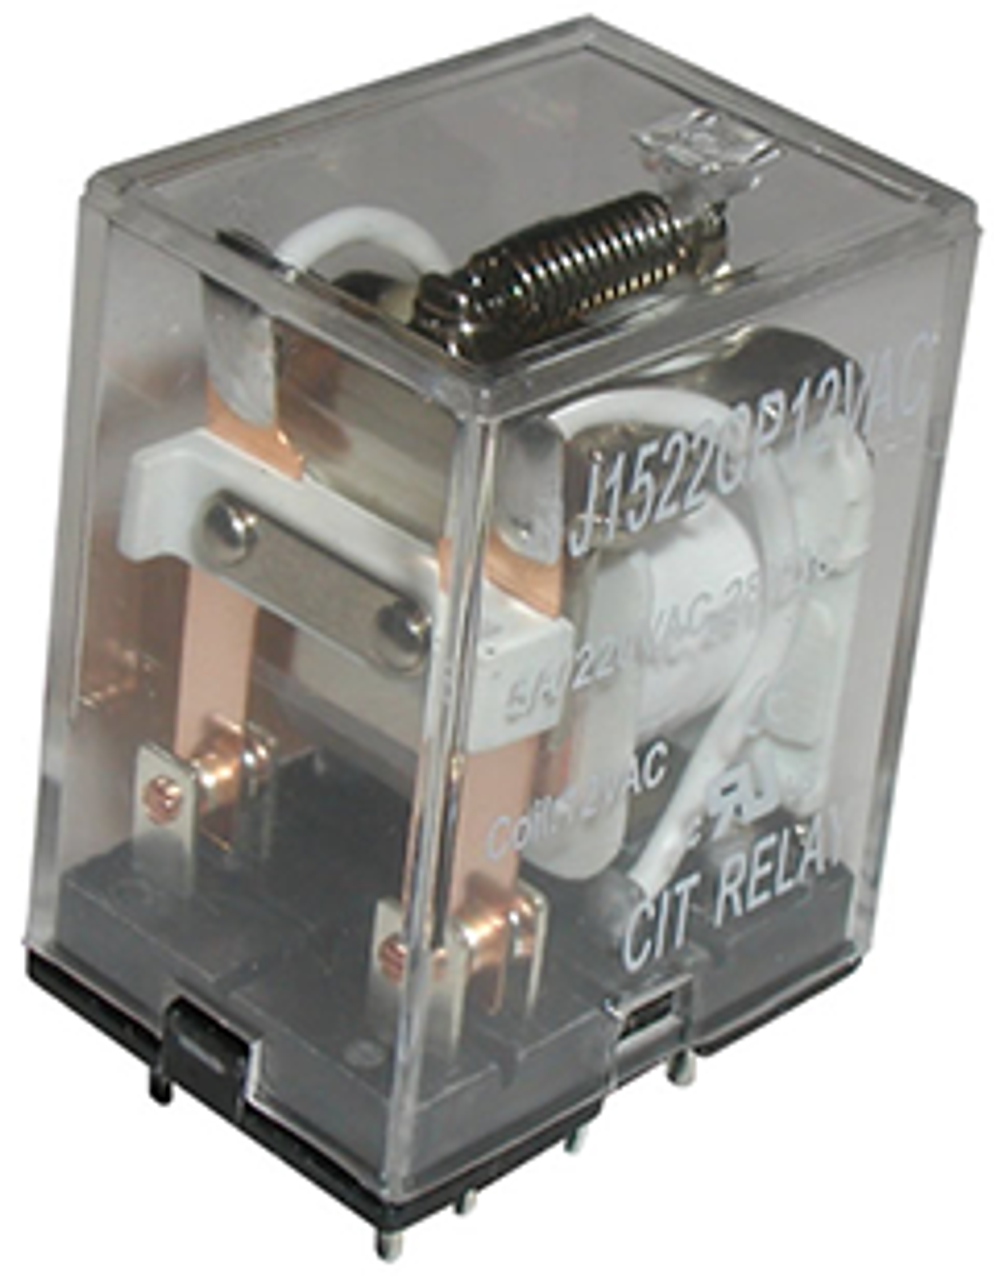 CIT Relay and Switch J1524CP12VDCDT Industrial Relays